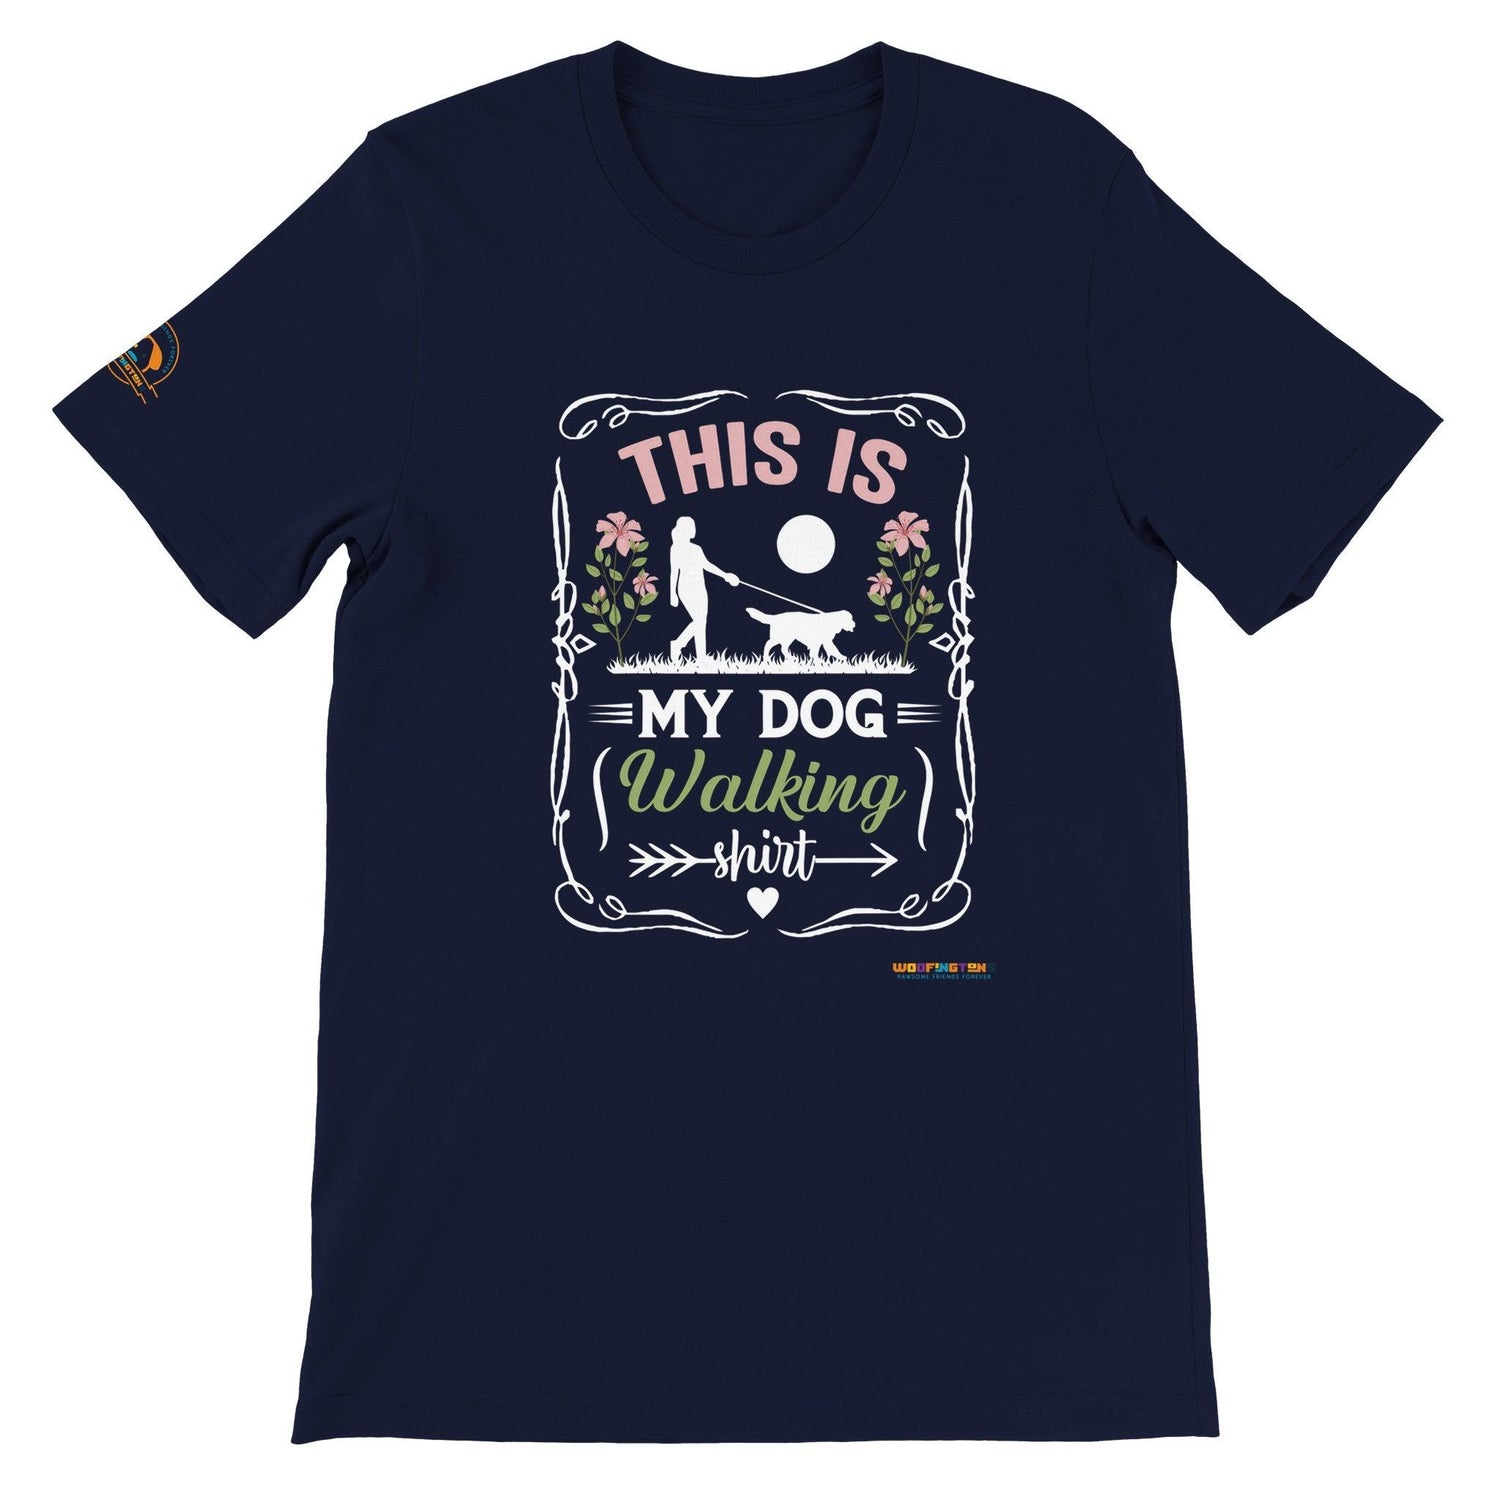 This Is My Dog Walking Shirt T-shirt - Woofingtons